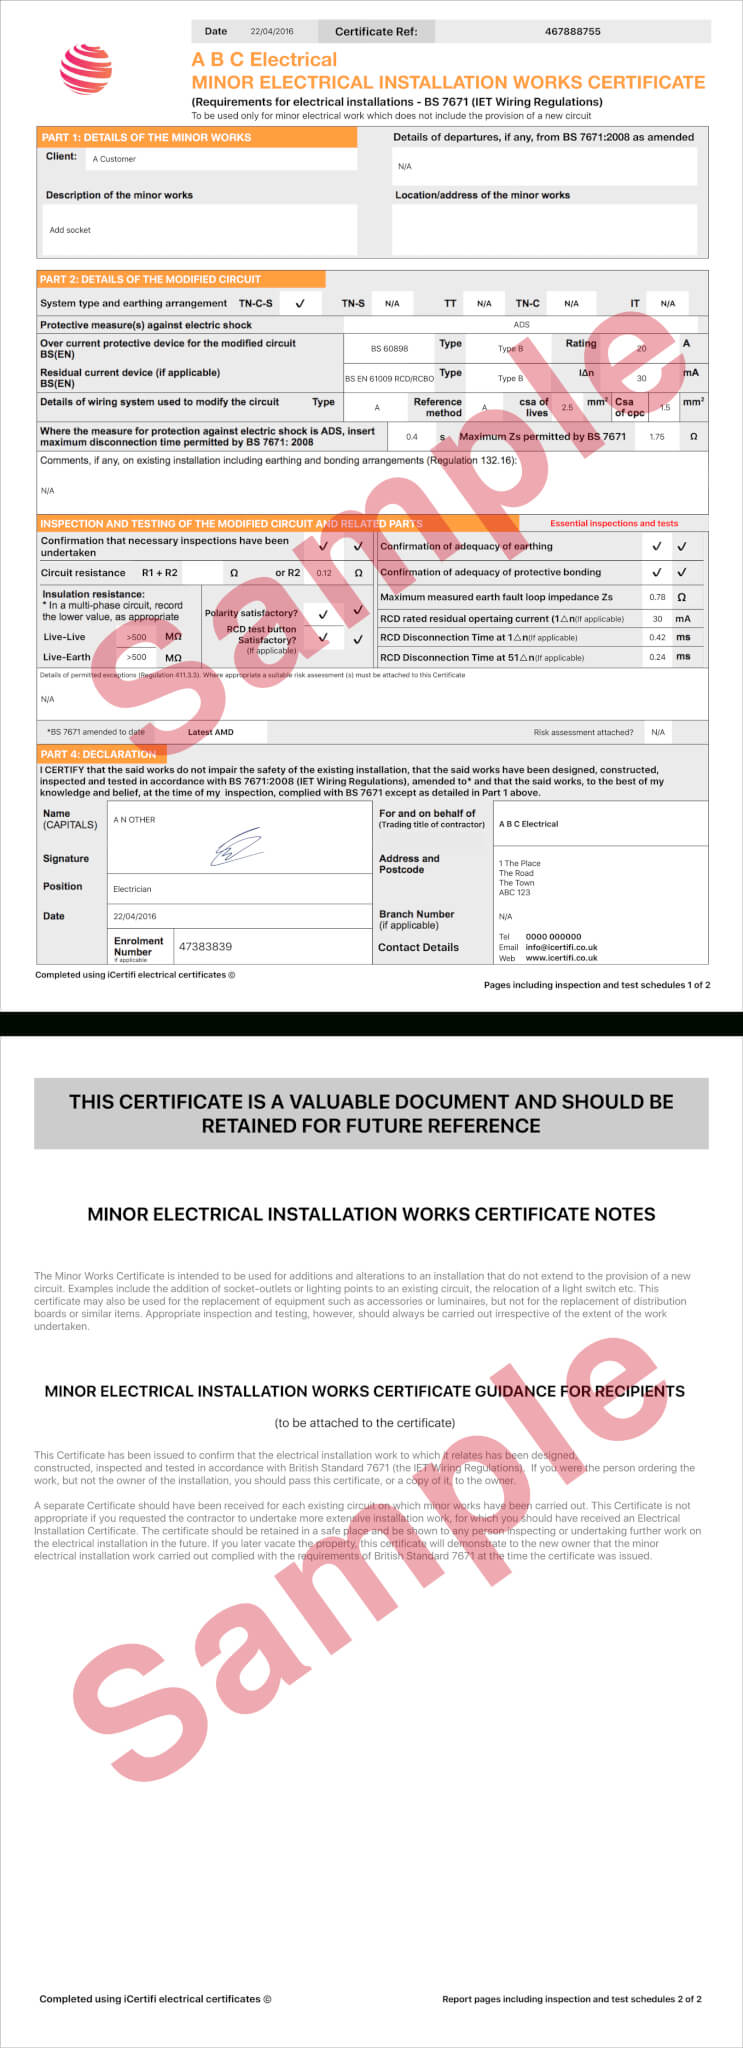 Electrical Certificate - Example Minor Works Certificate In Minor Electrical Installation Works Certificate Template